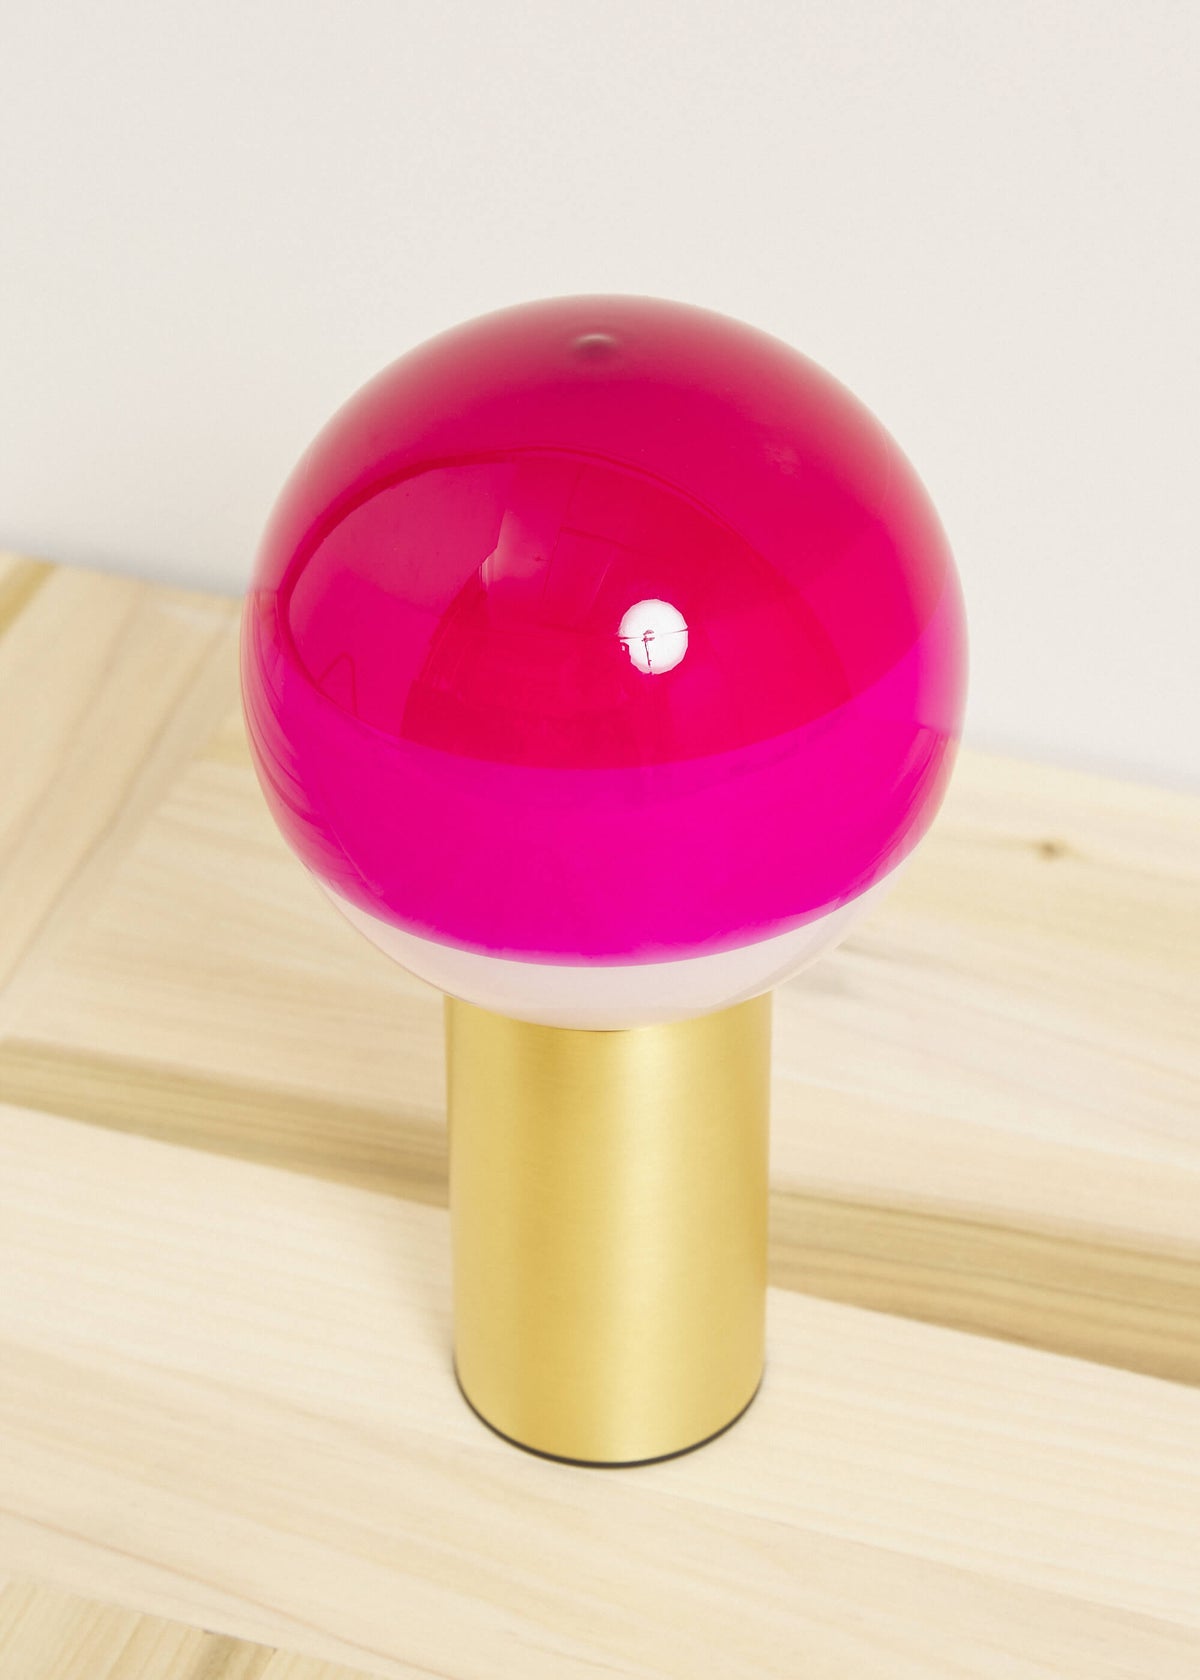 DIPPING LIGHT PORTABLE LAMP - PINK by Marset